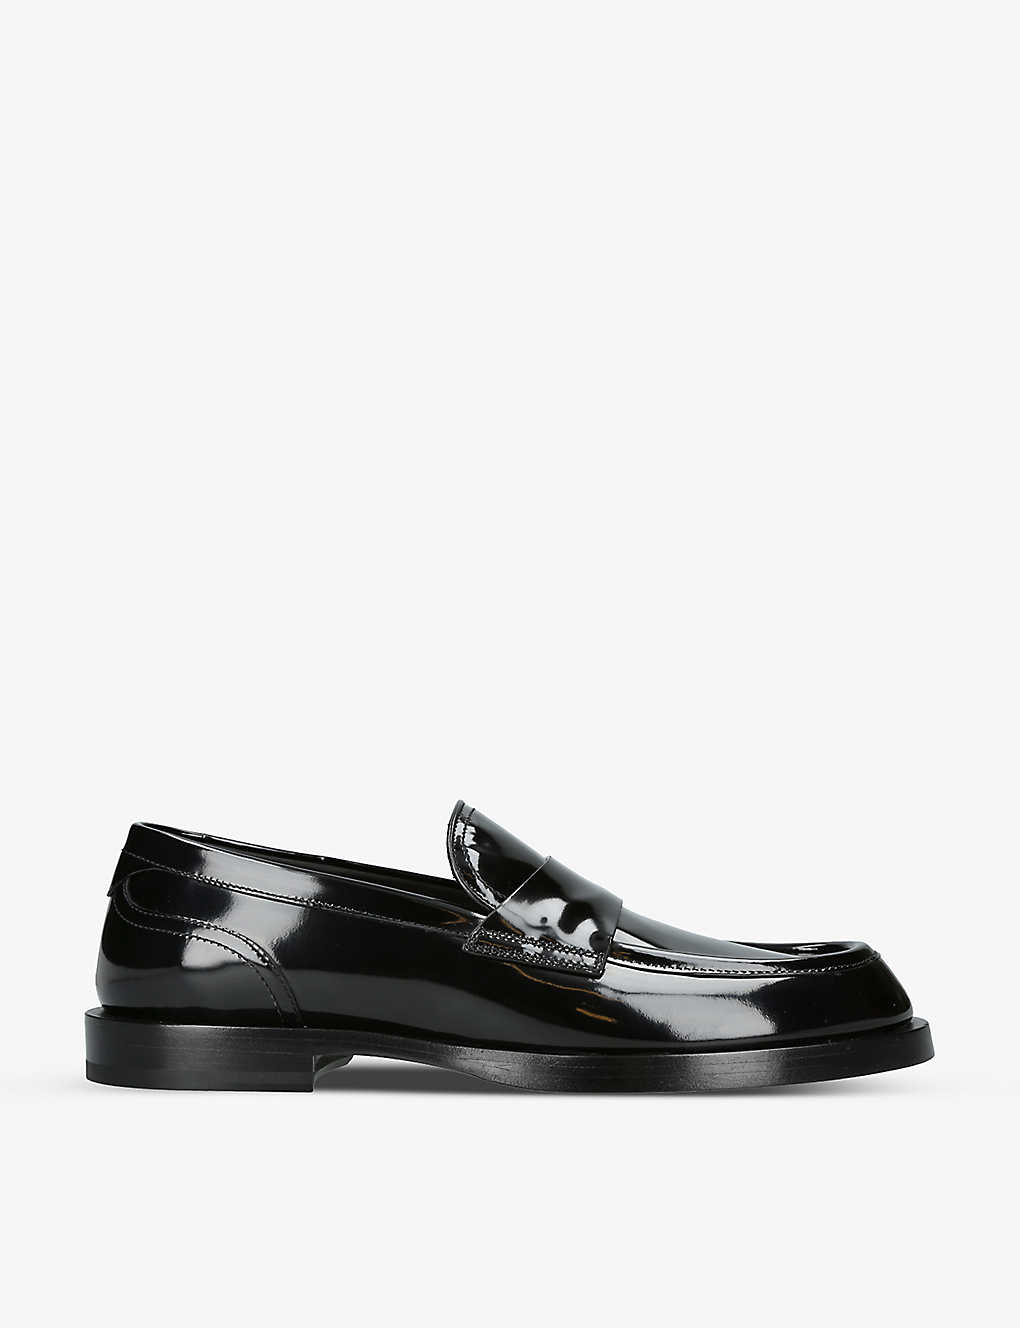 Dolce & Gabbana Round-toe Patent-leather Penny Loafers In Black